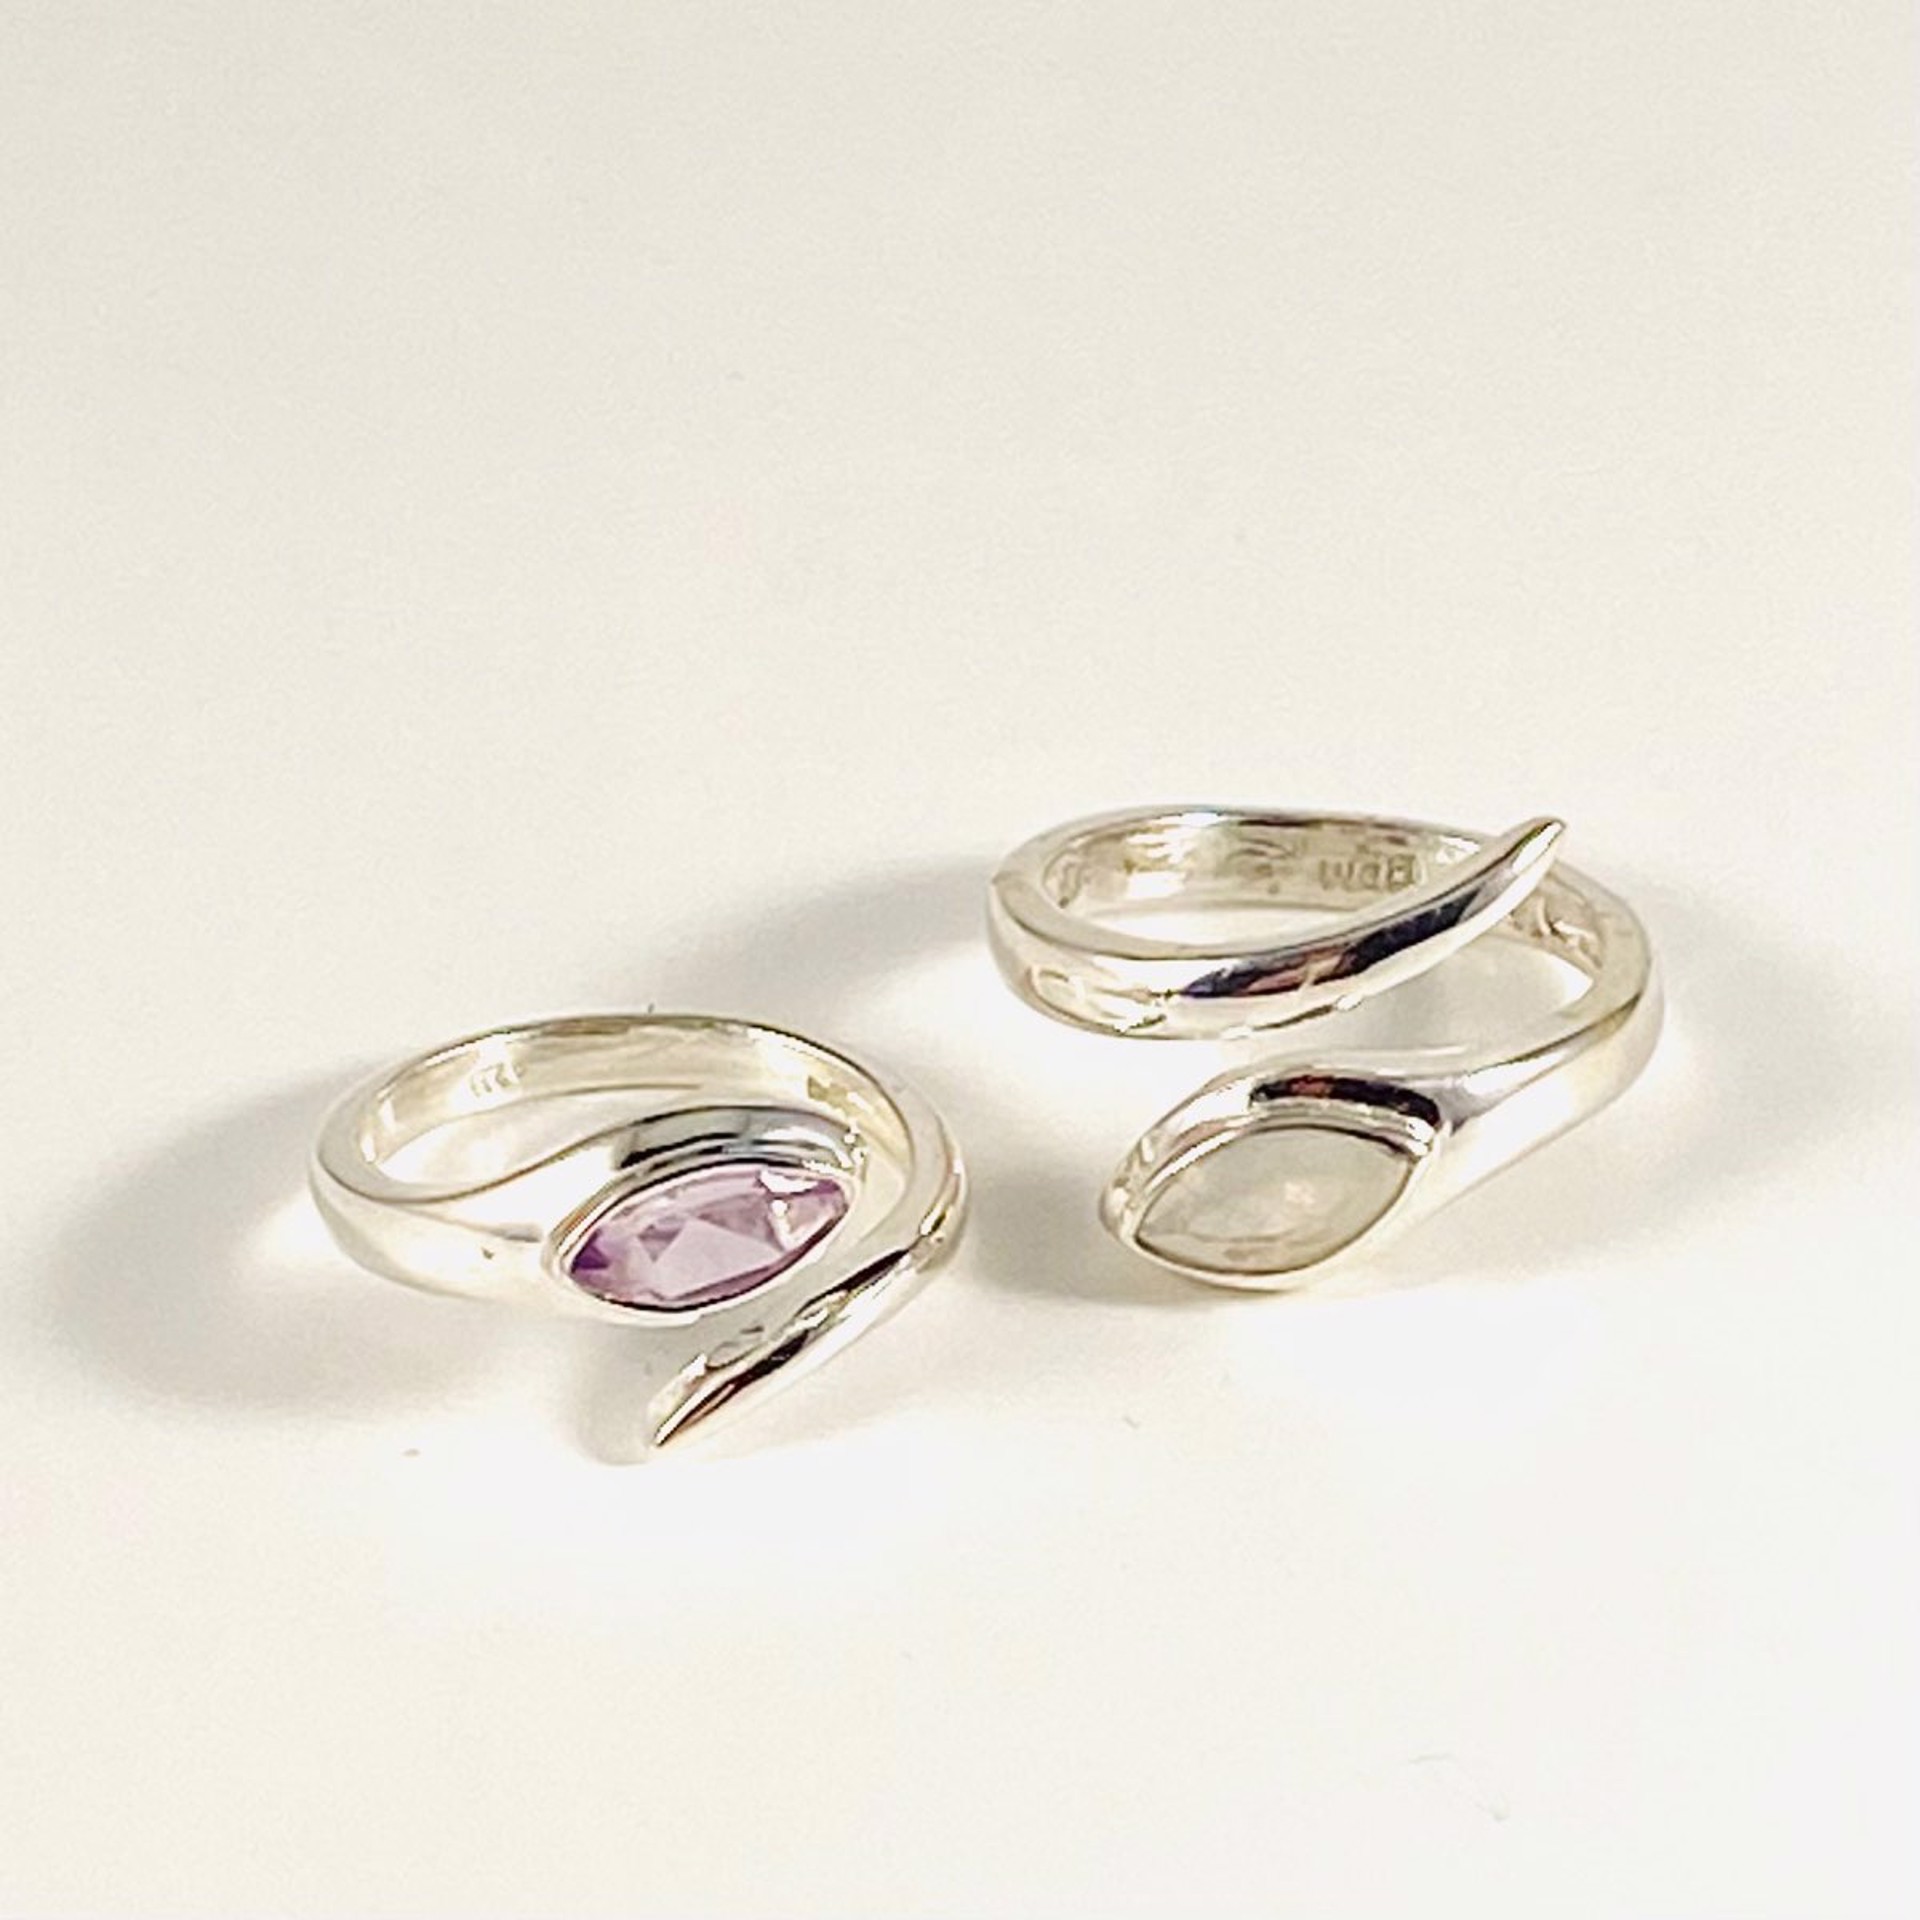 MON SR 3191 Moonstone or Amethyst LIMITED  SIZES by Monica Mehta